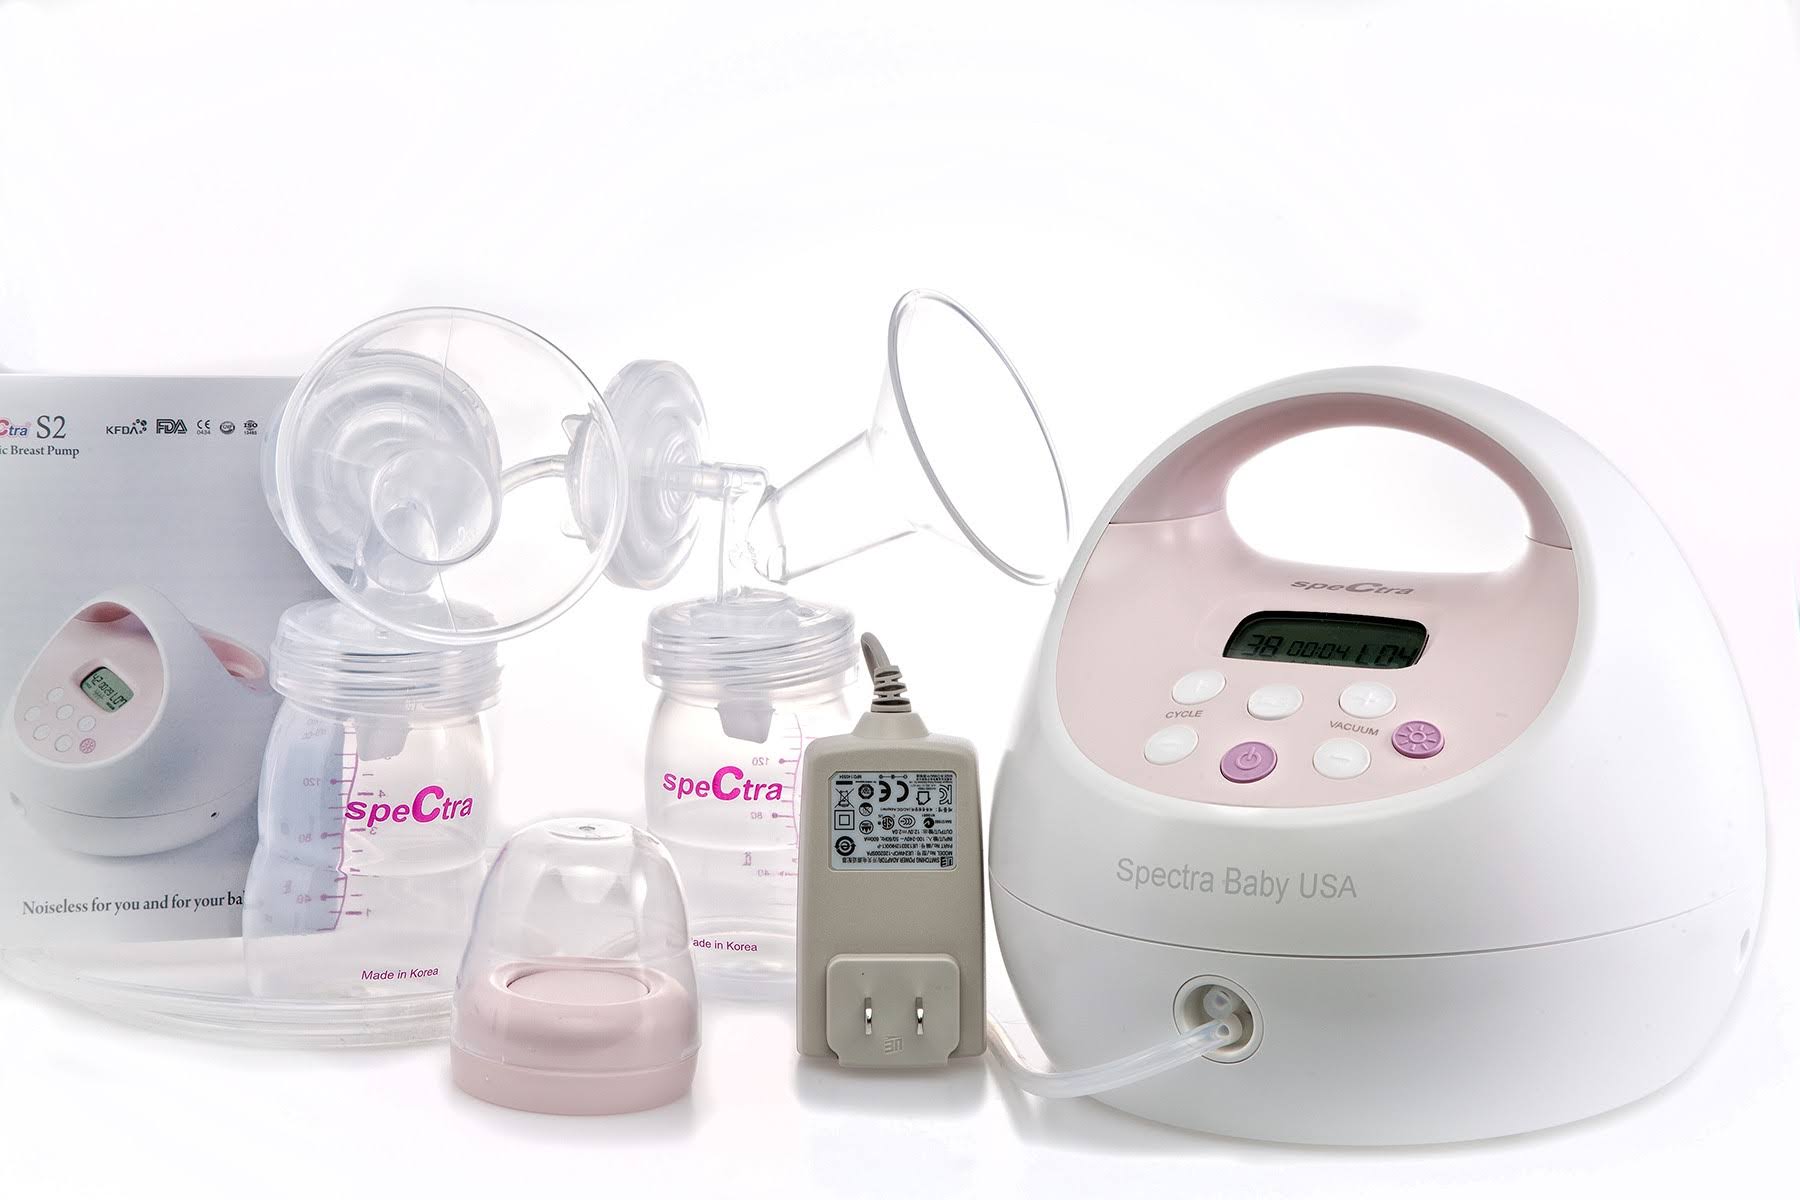 Everready First Aid Spectra Baby USA - S2 Hospital Grade Double/Single Electric Breast Pump